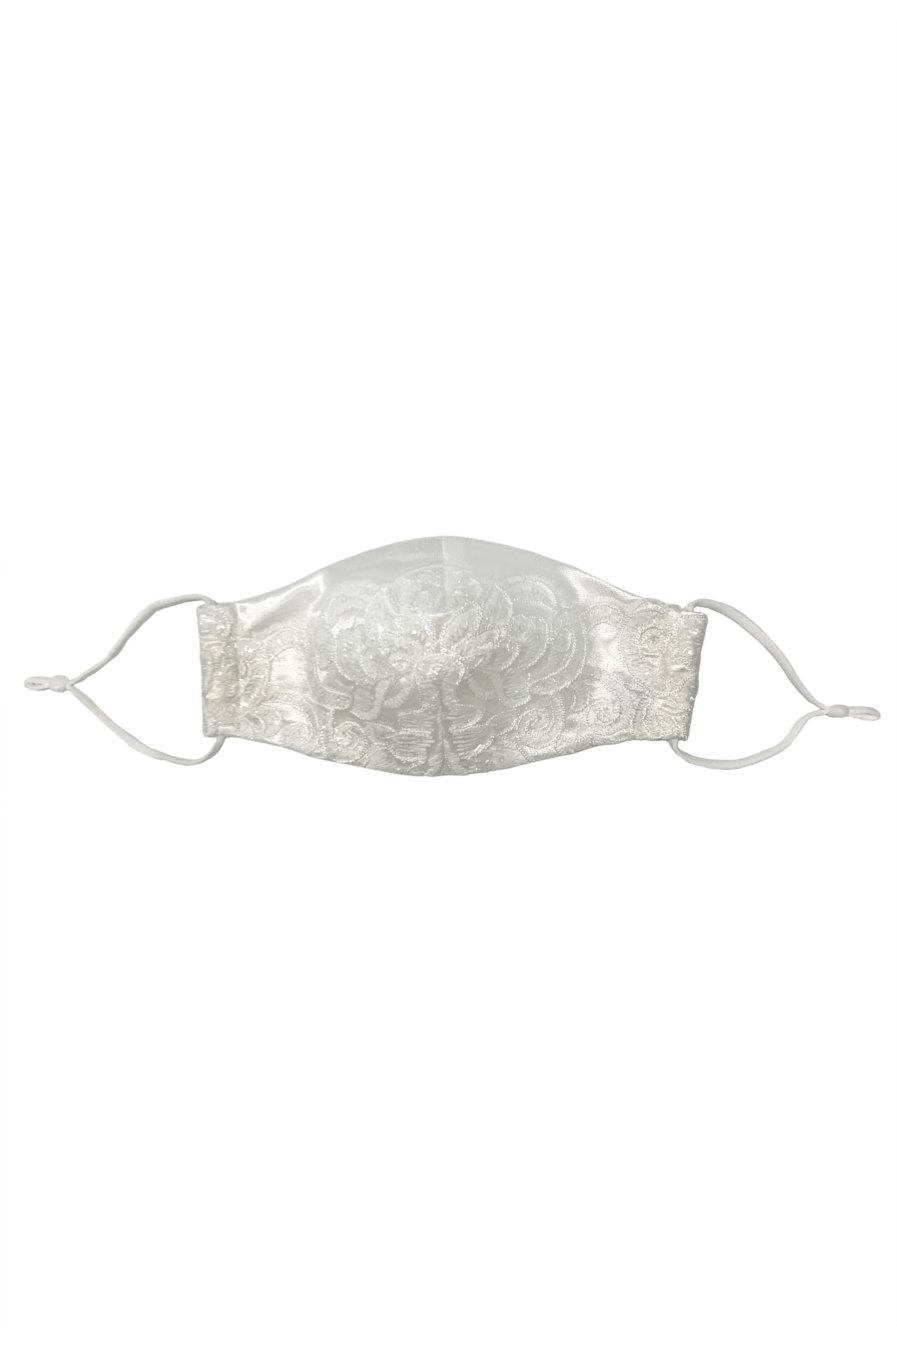 Chie Chic Posh Mask - White Dance (Special Order)